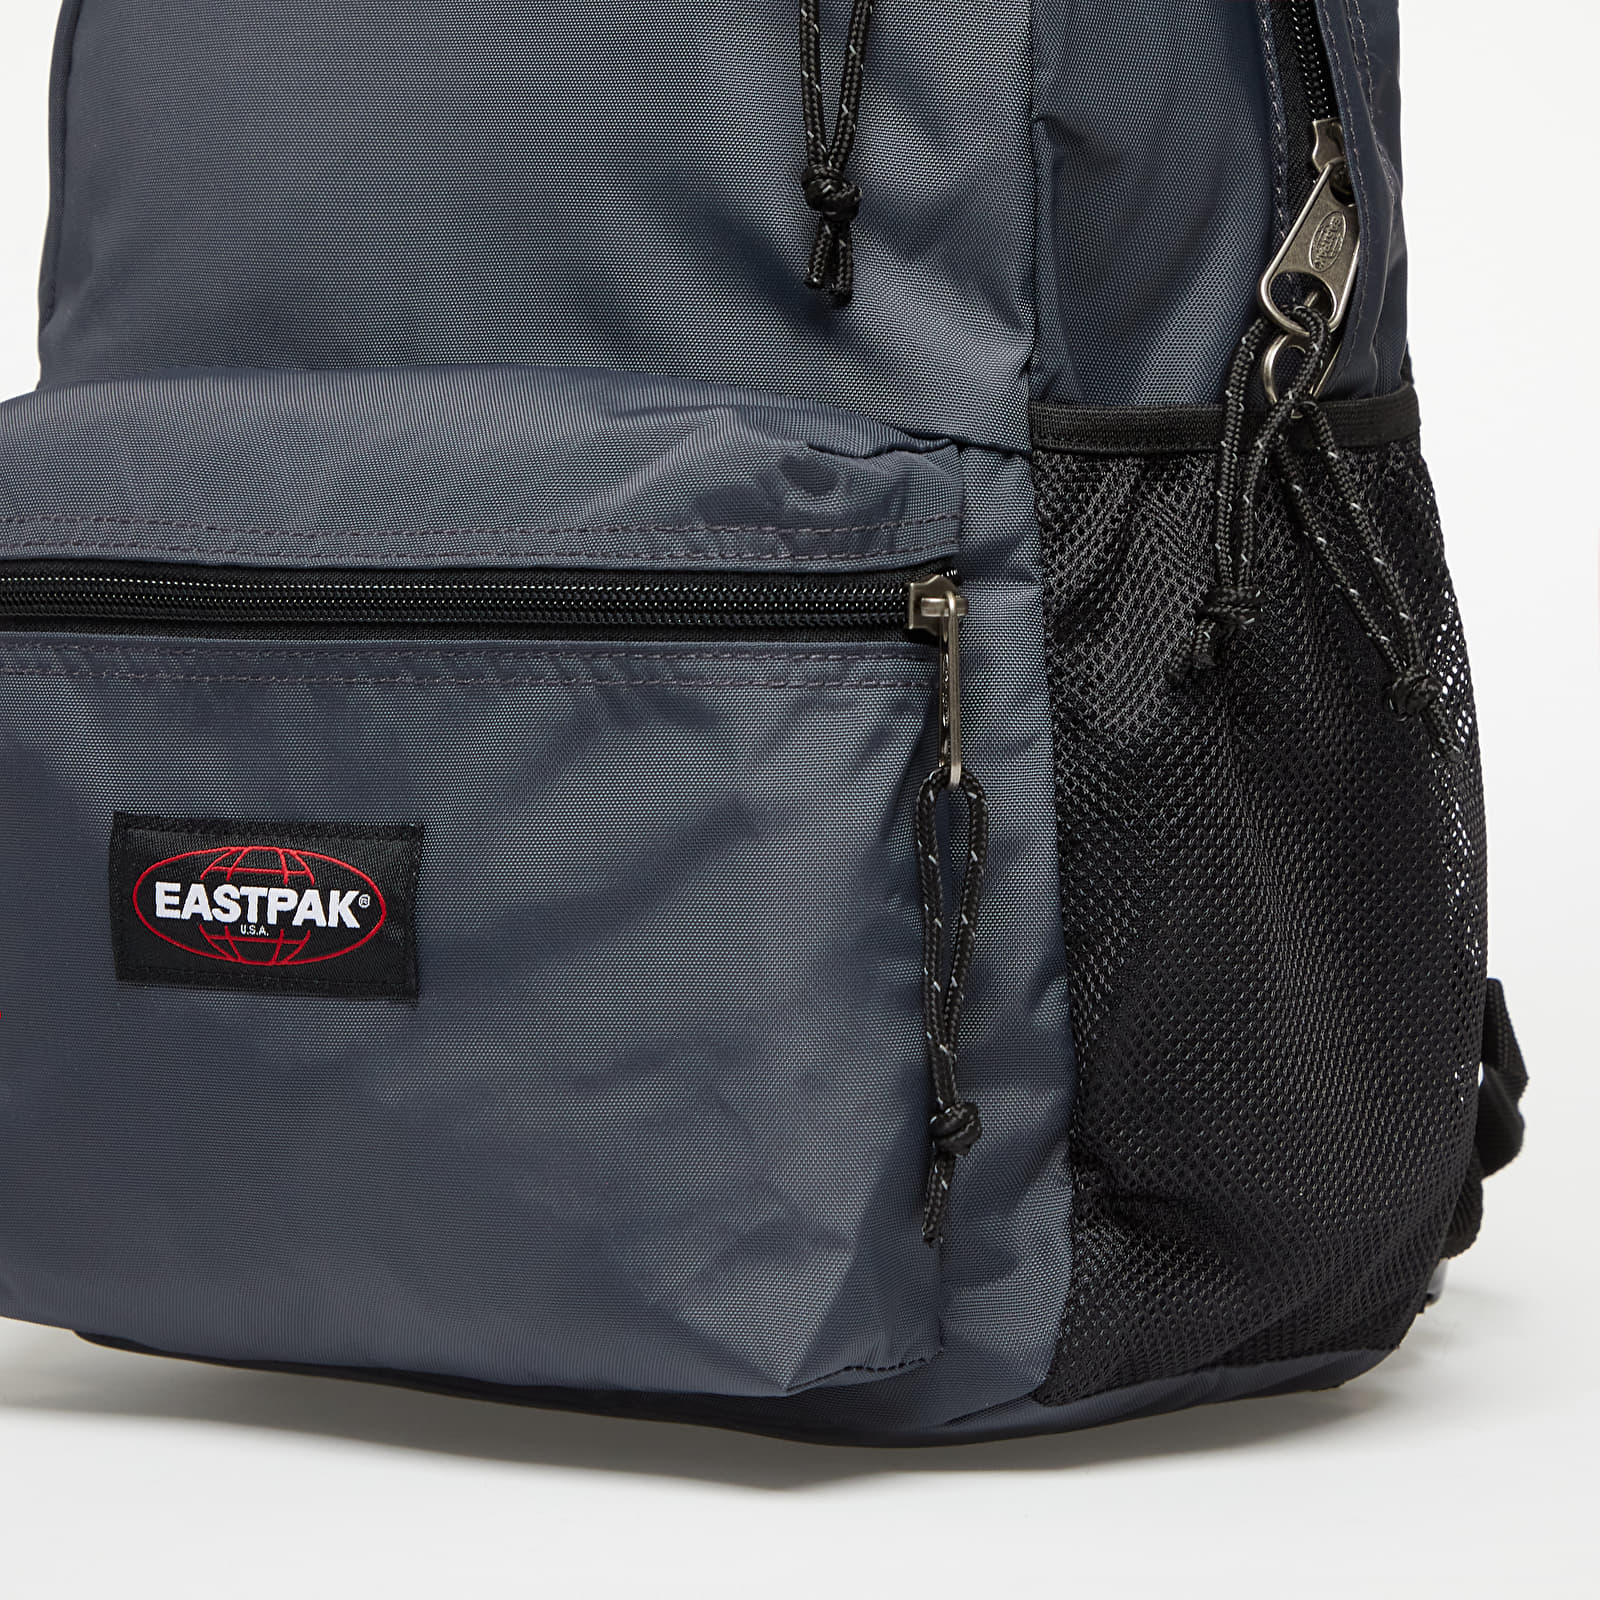 Eastpak pinnacle backpack with front pocket